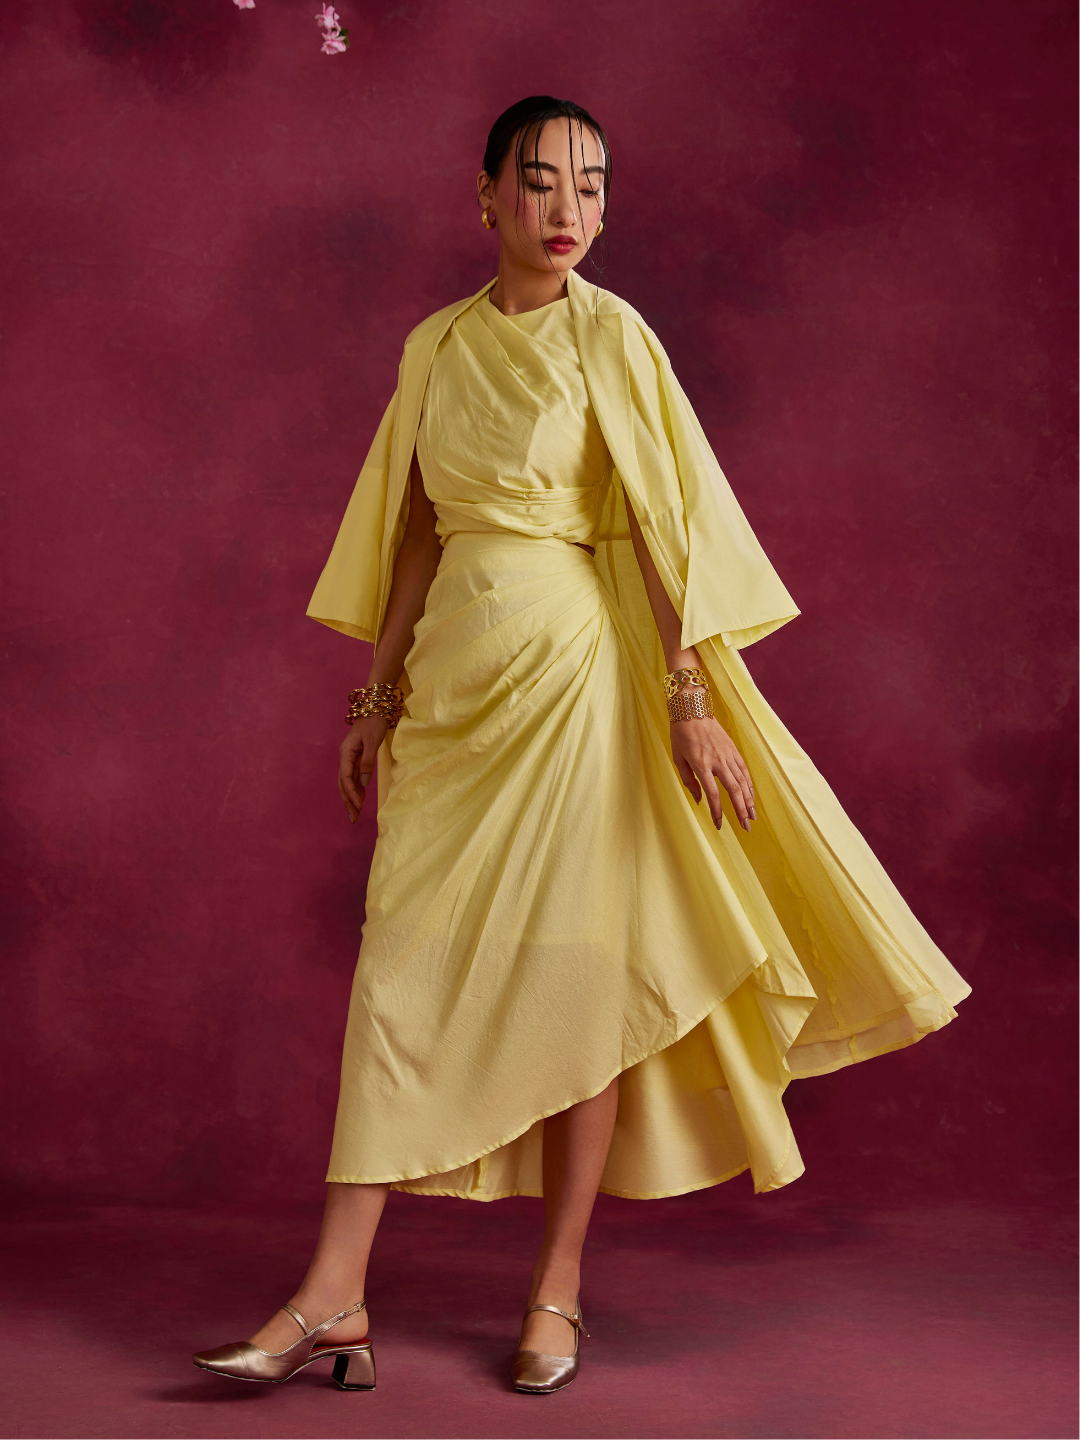 Pleated drape top & skirt co-ord set layered with flared jacket- Lemon yellow